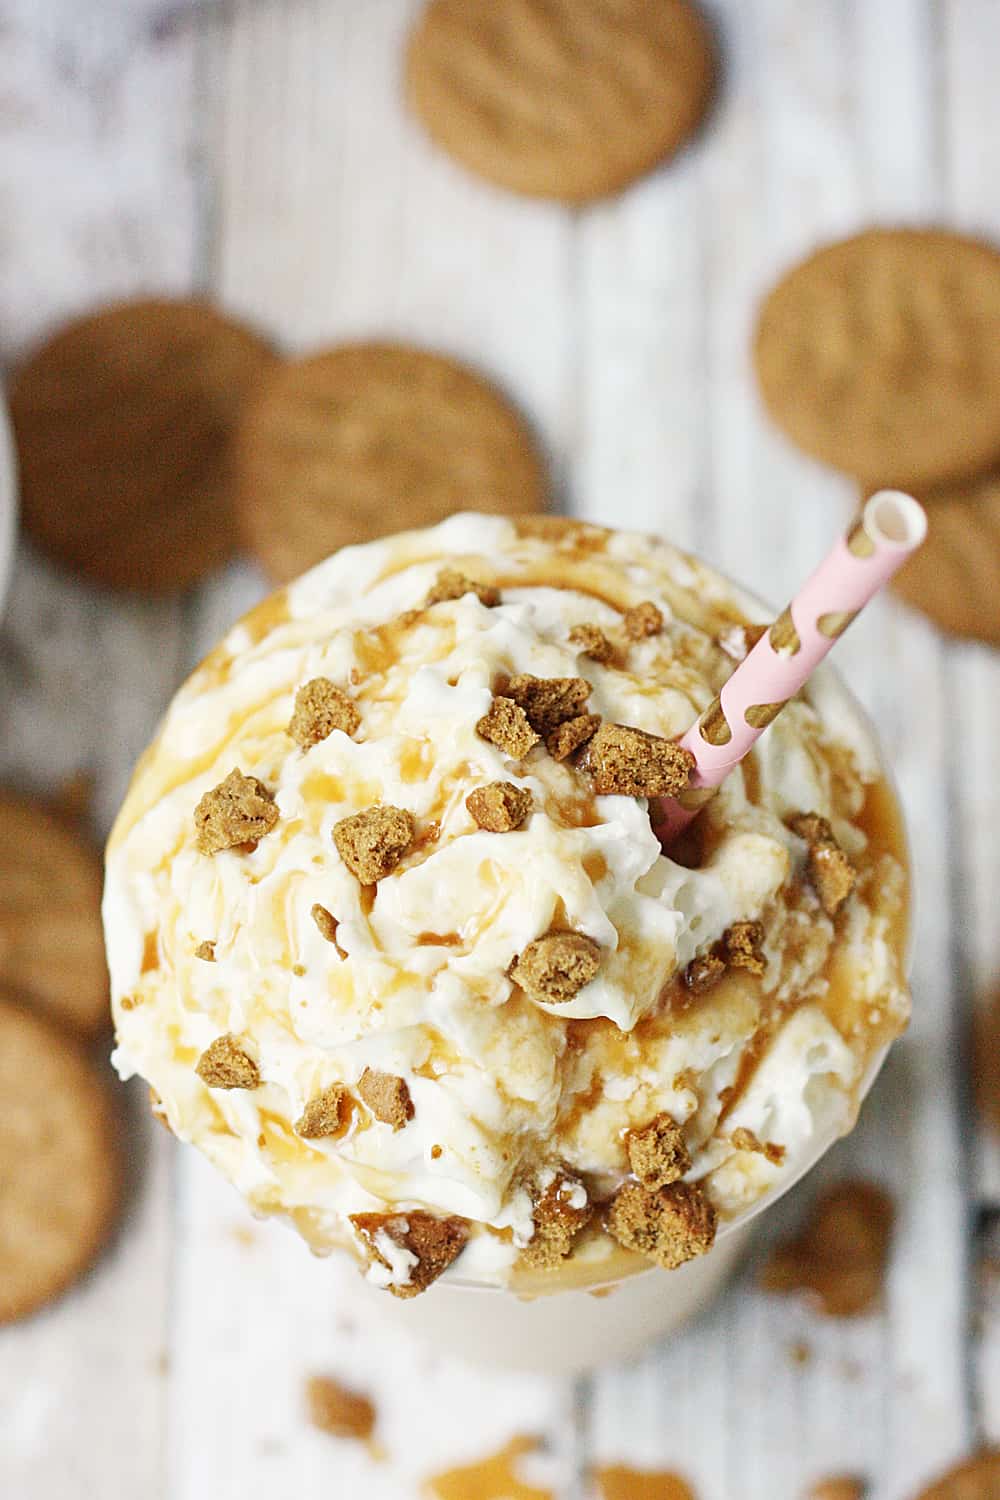 Gingerbread Cookie Cream Frappe -- This gingerbread cookie cream frappe is creamy, frosty, and full of gingerbread and caramel flavor. It's sure to become your new favorite holiday drink!